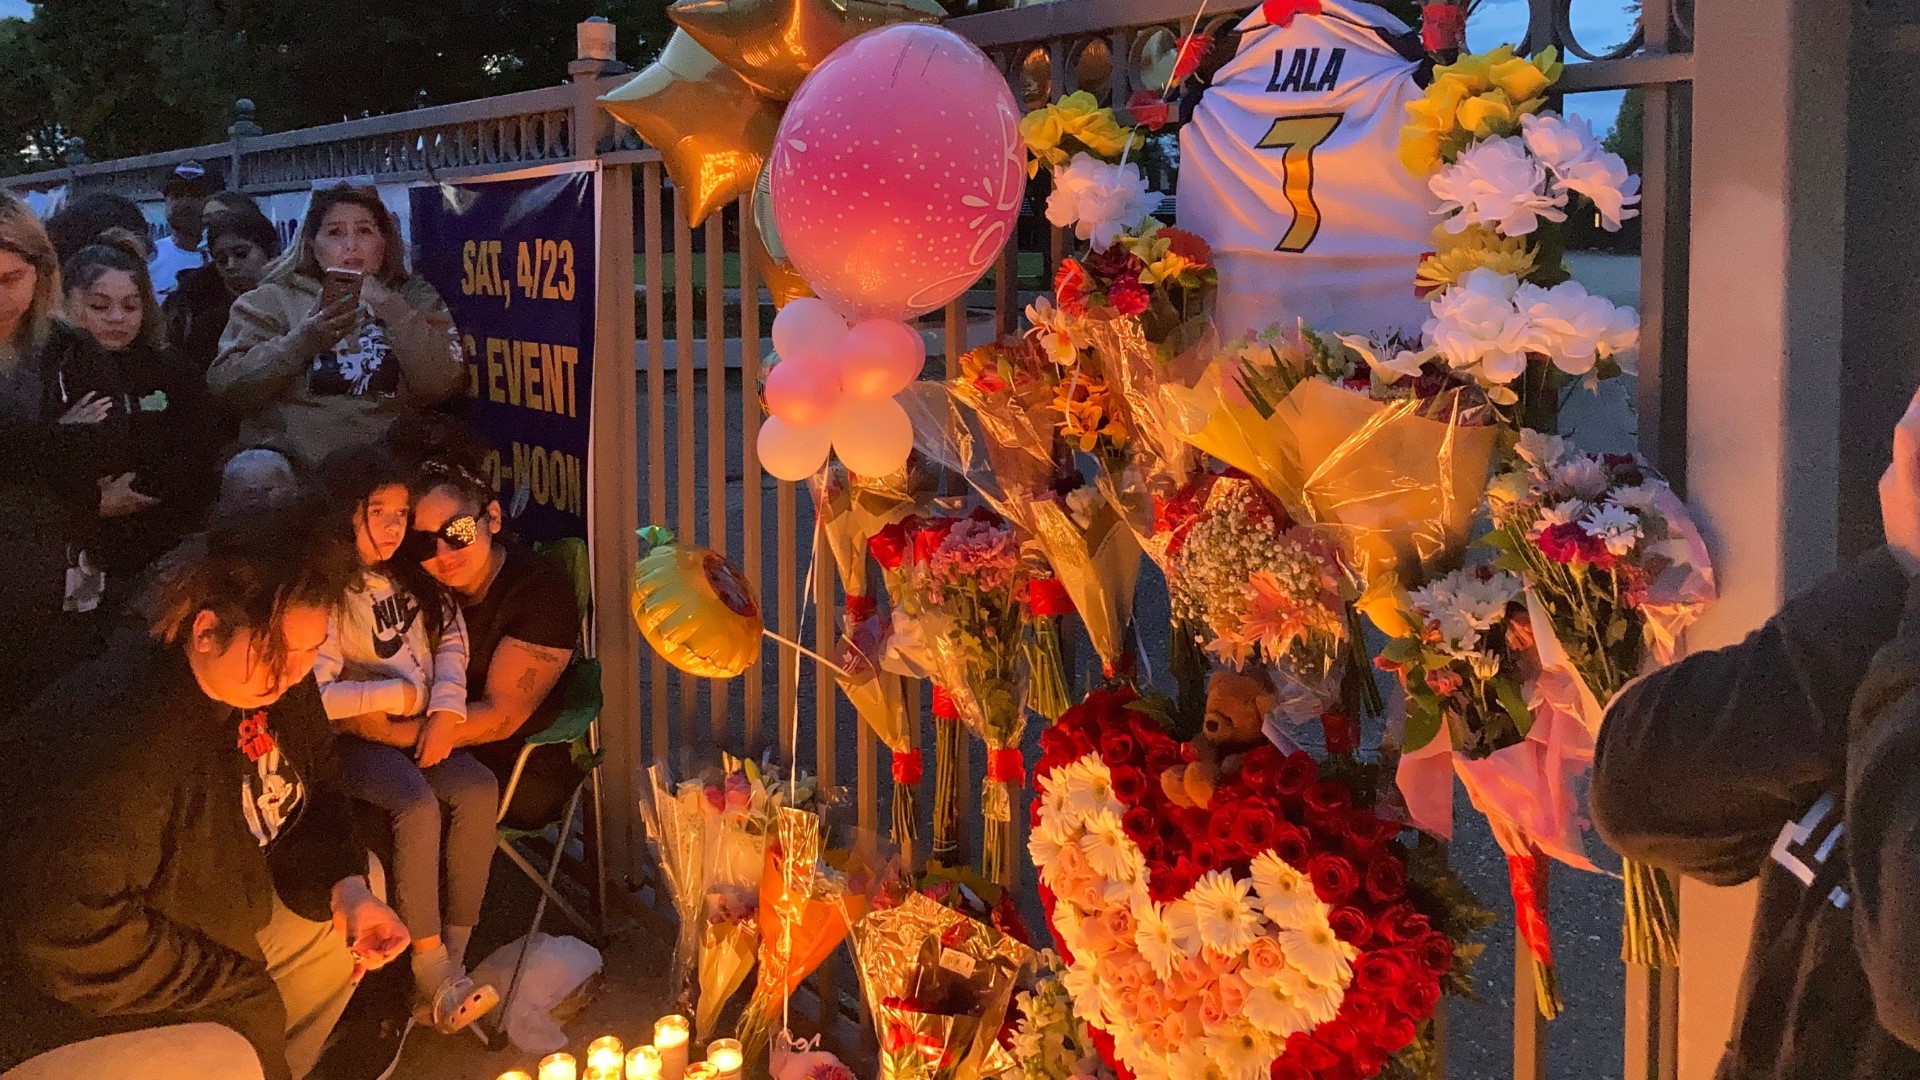 15-year-old Alicia Reynaga died after being stabbed at Stagg High School in Stockton on Monday, according to the Stockton Unified School District.